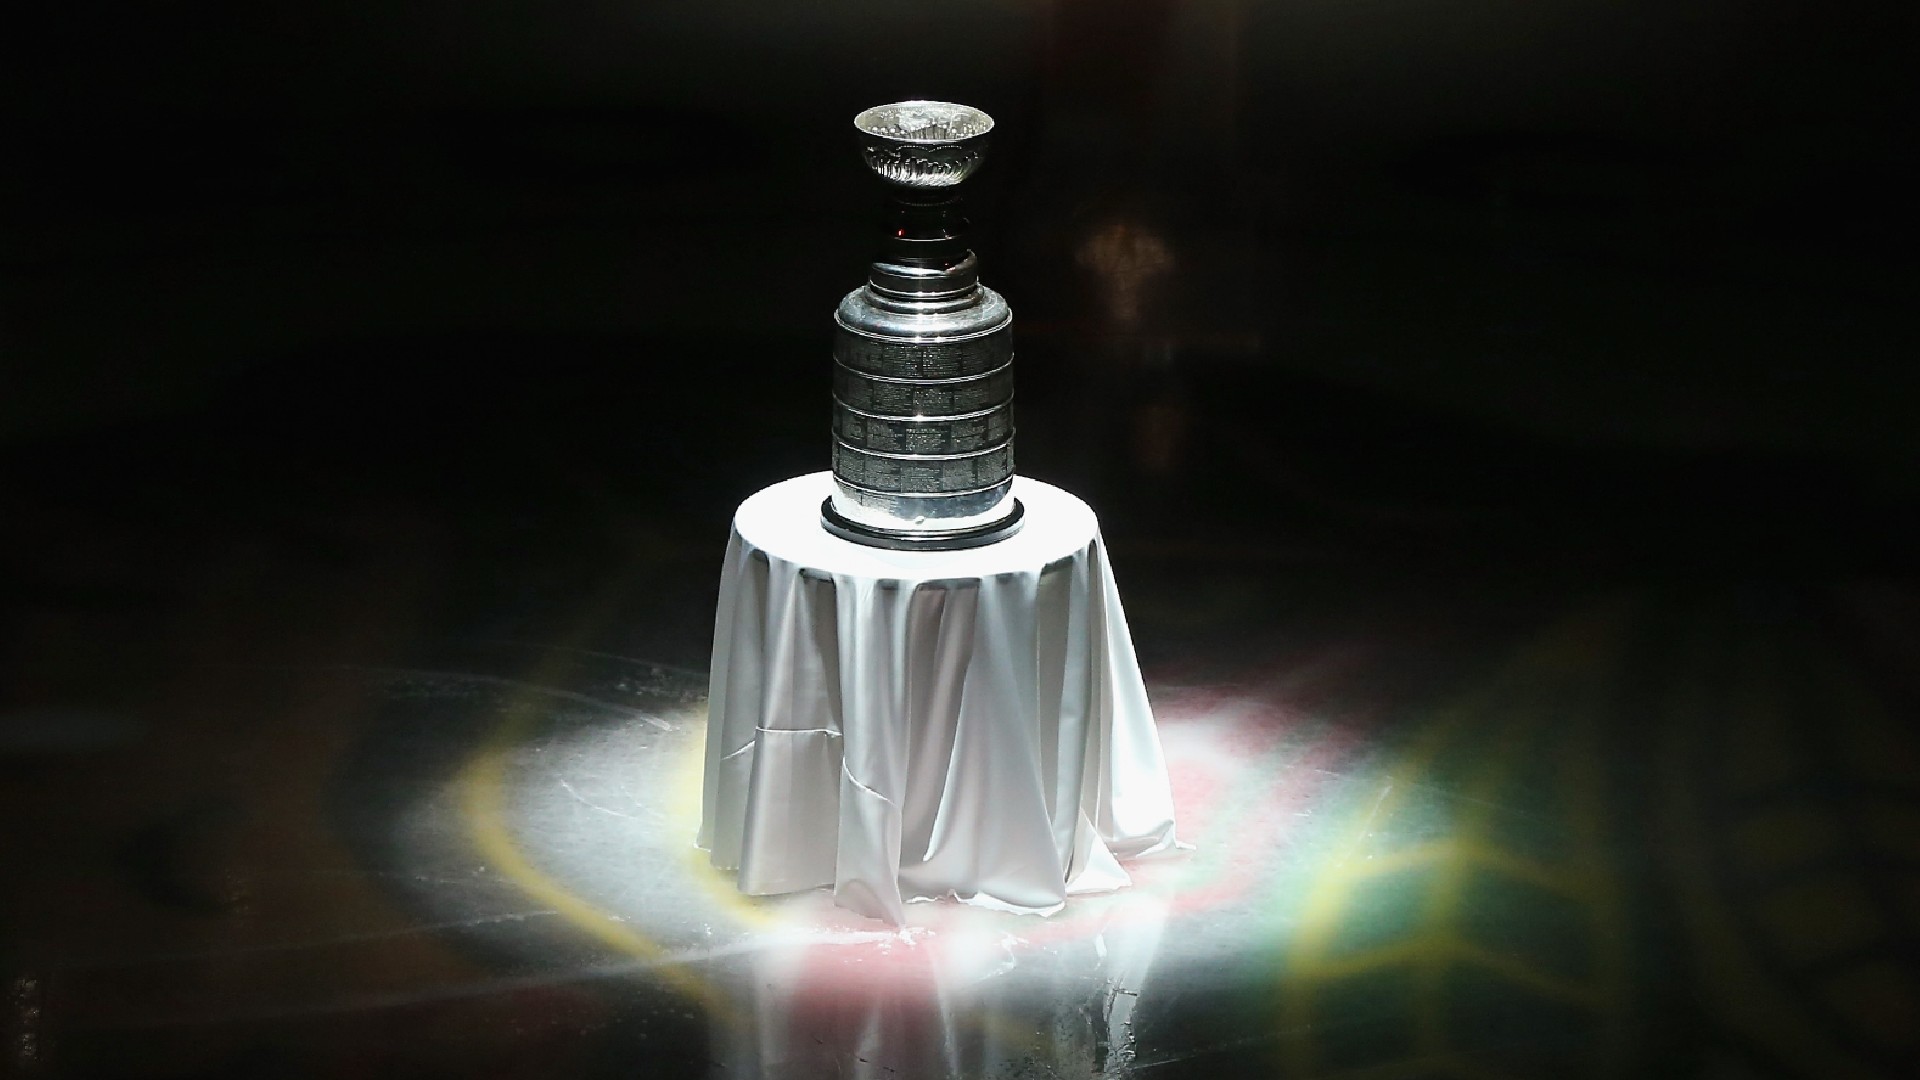 NHL playoff games today: Full TV schedule to watch 2021 Stanley Cup